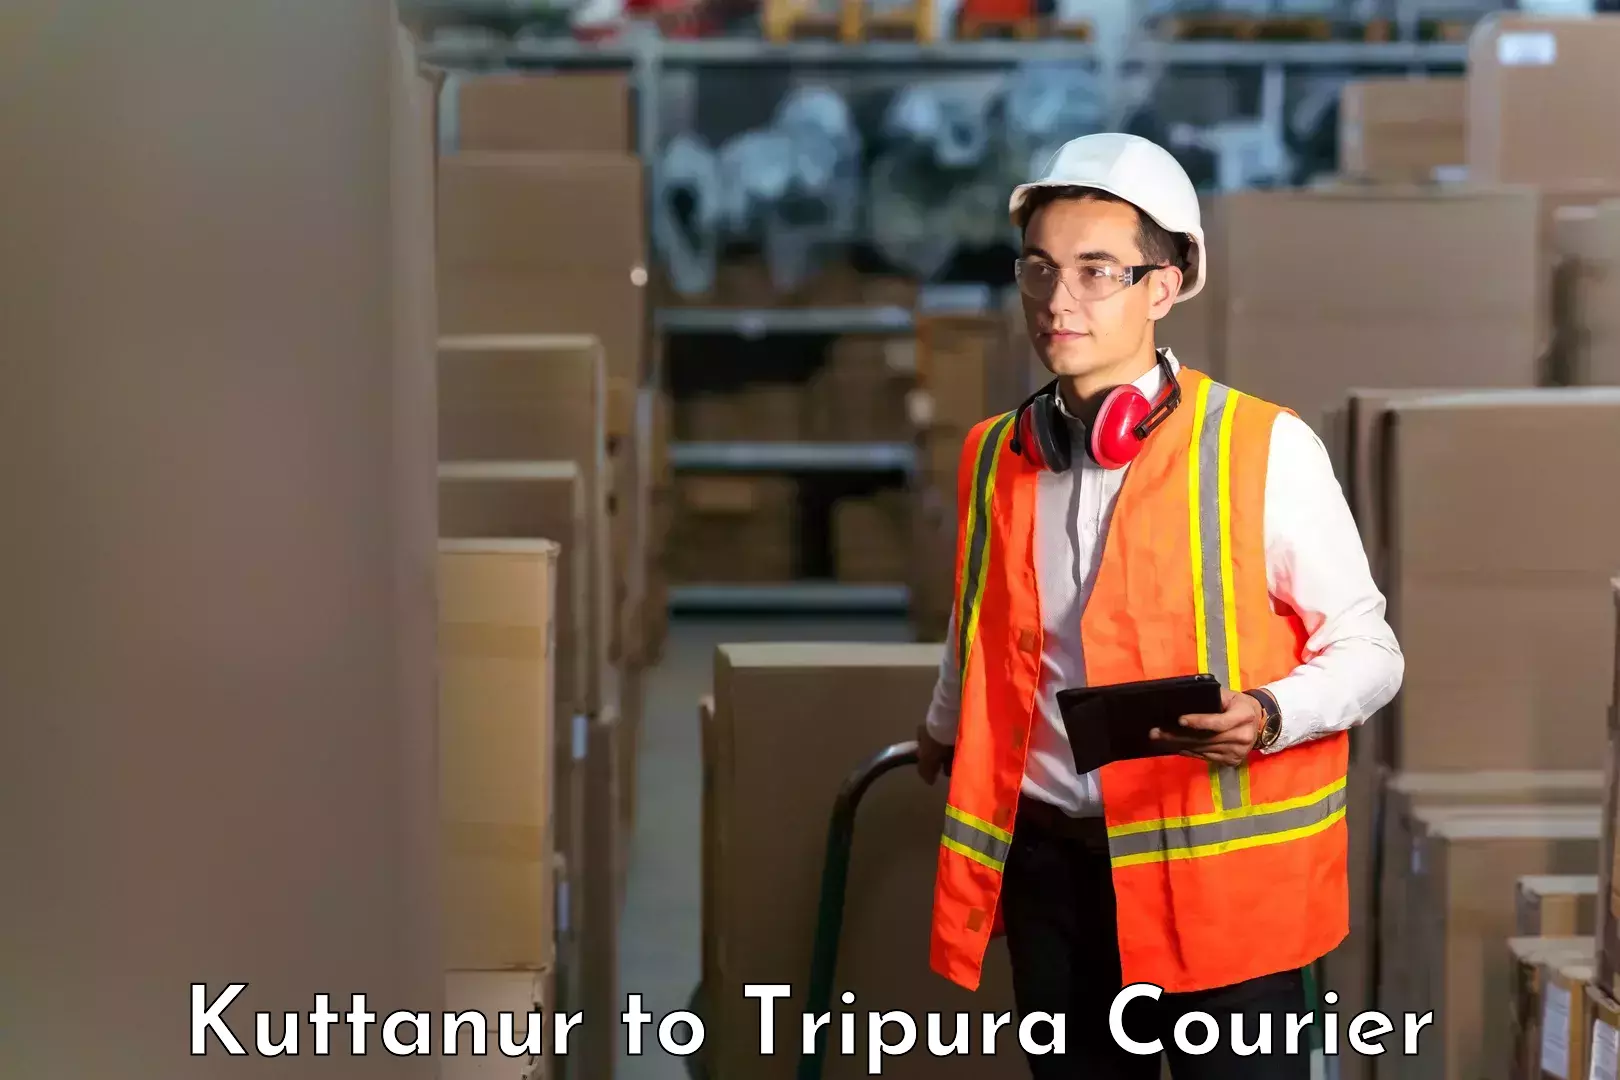 Full-service courier options Kuttanur to Udaipur Tripura